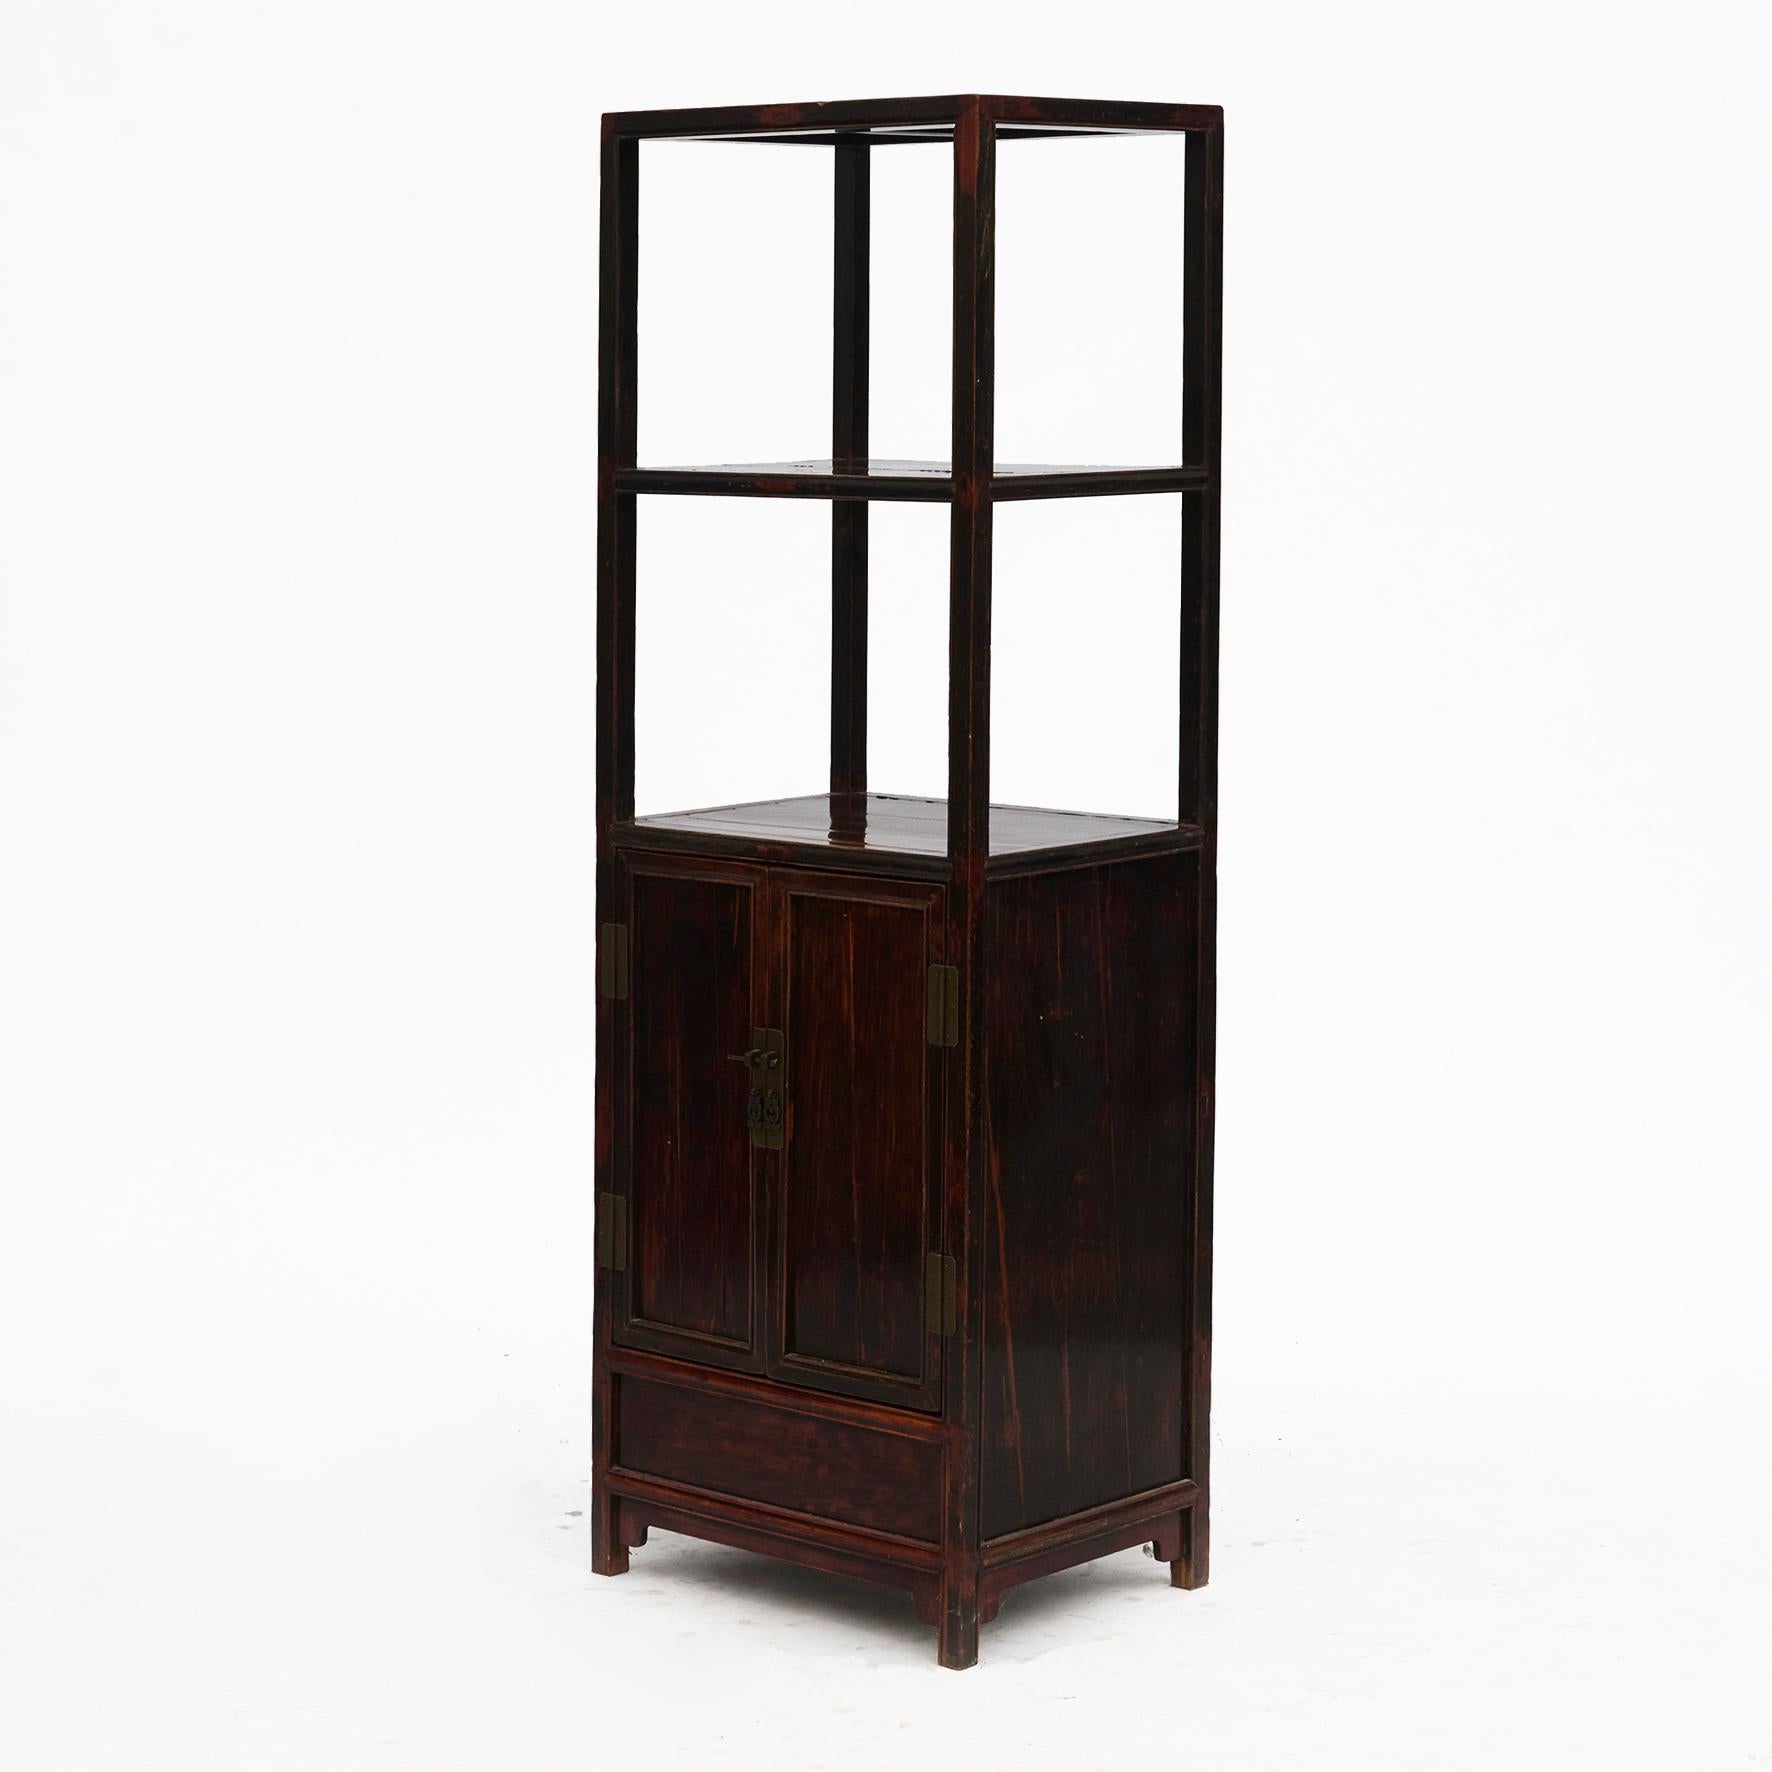 Elegant etagere cabinet in Ming style.
Made in walnut with burgundy lacquer finish
Frame with elegant profiles. Lower part has a double door with metal fittings.
Natural age-related patina.

From China, Jiangsu Province approx. 1840.